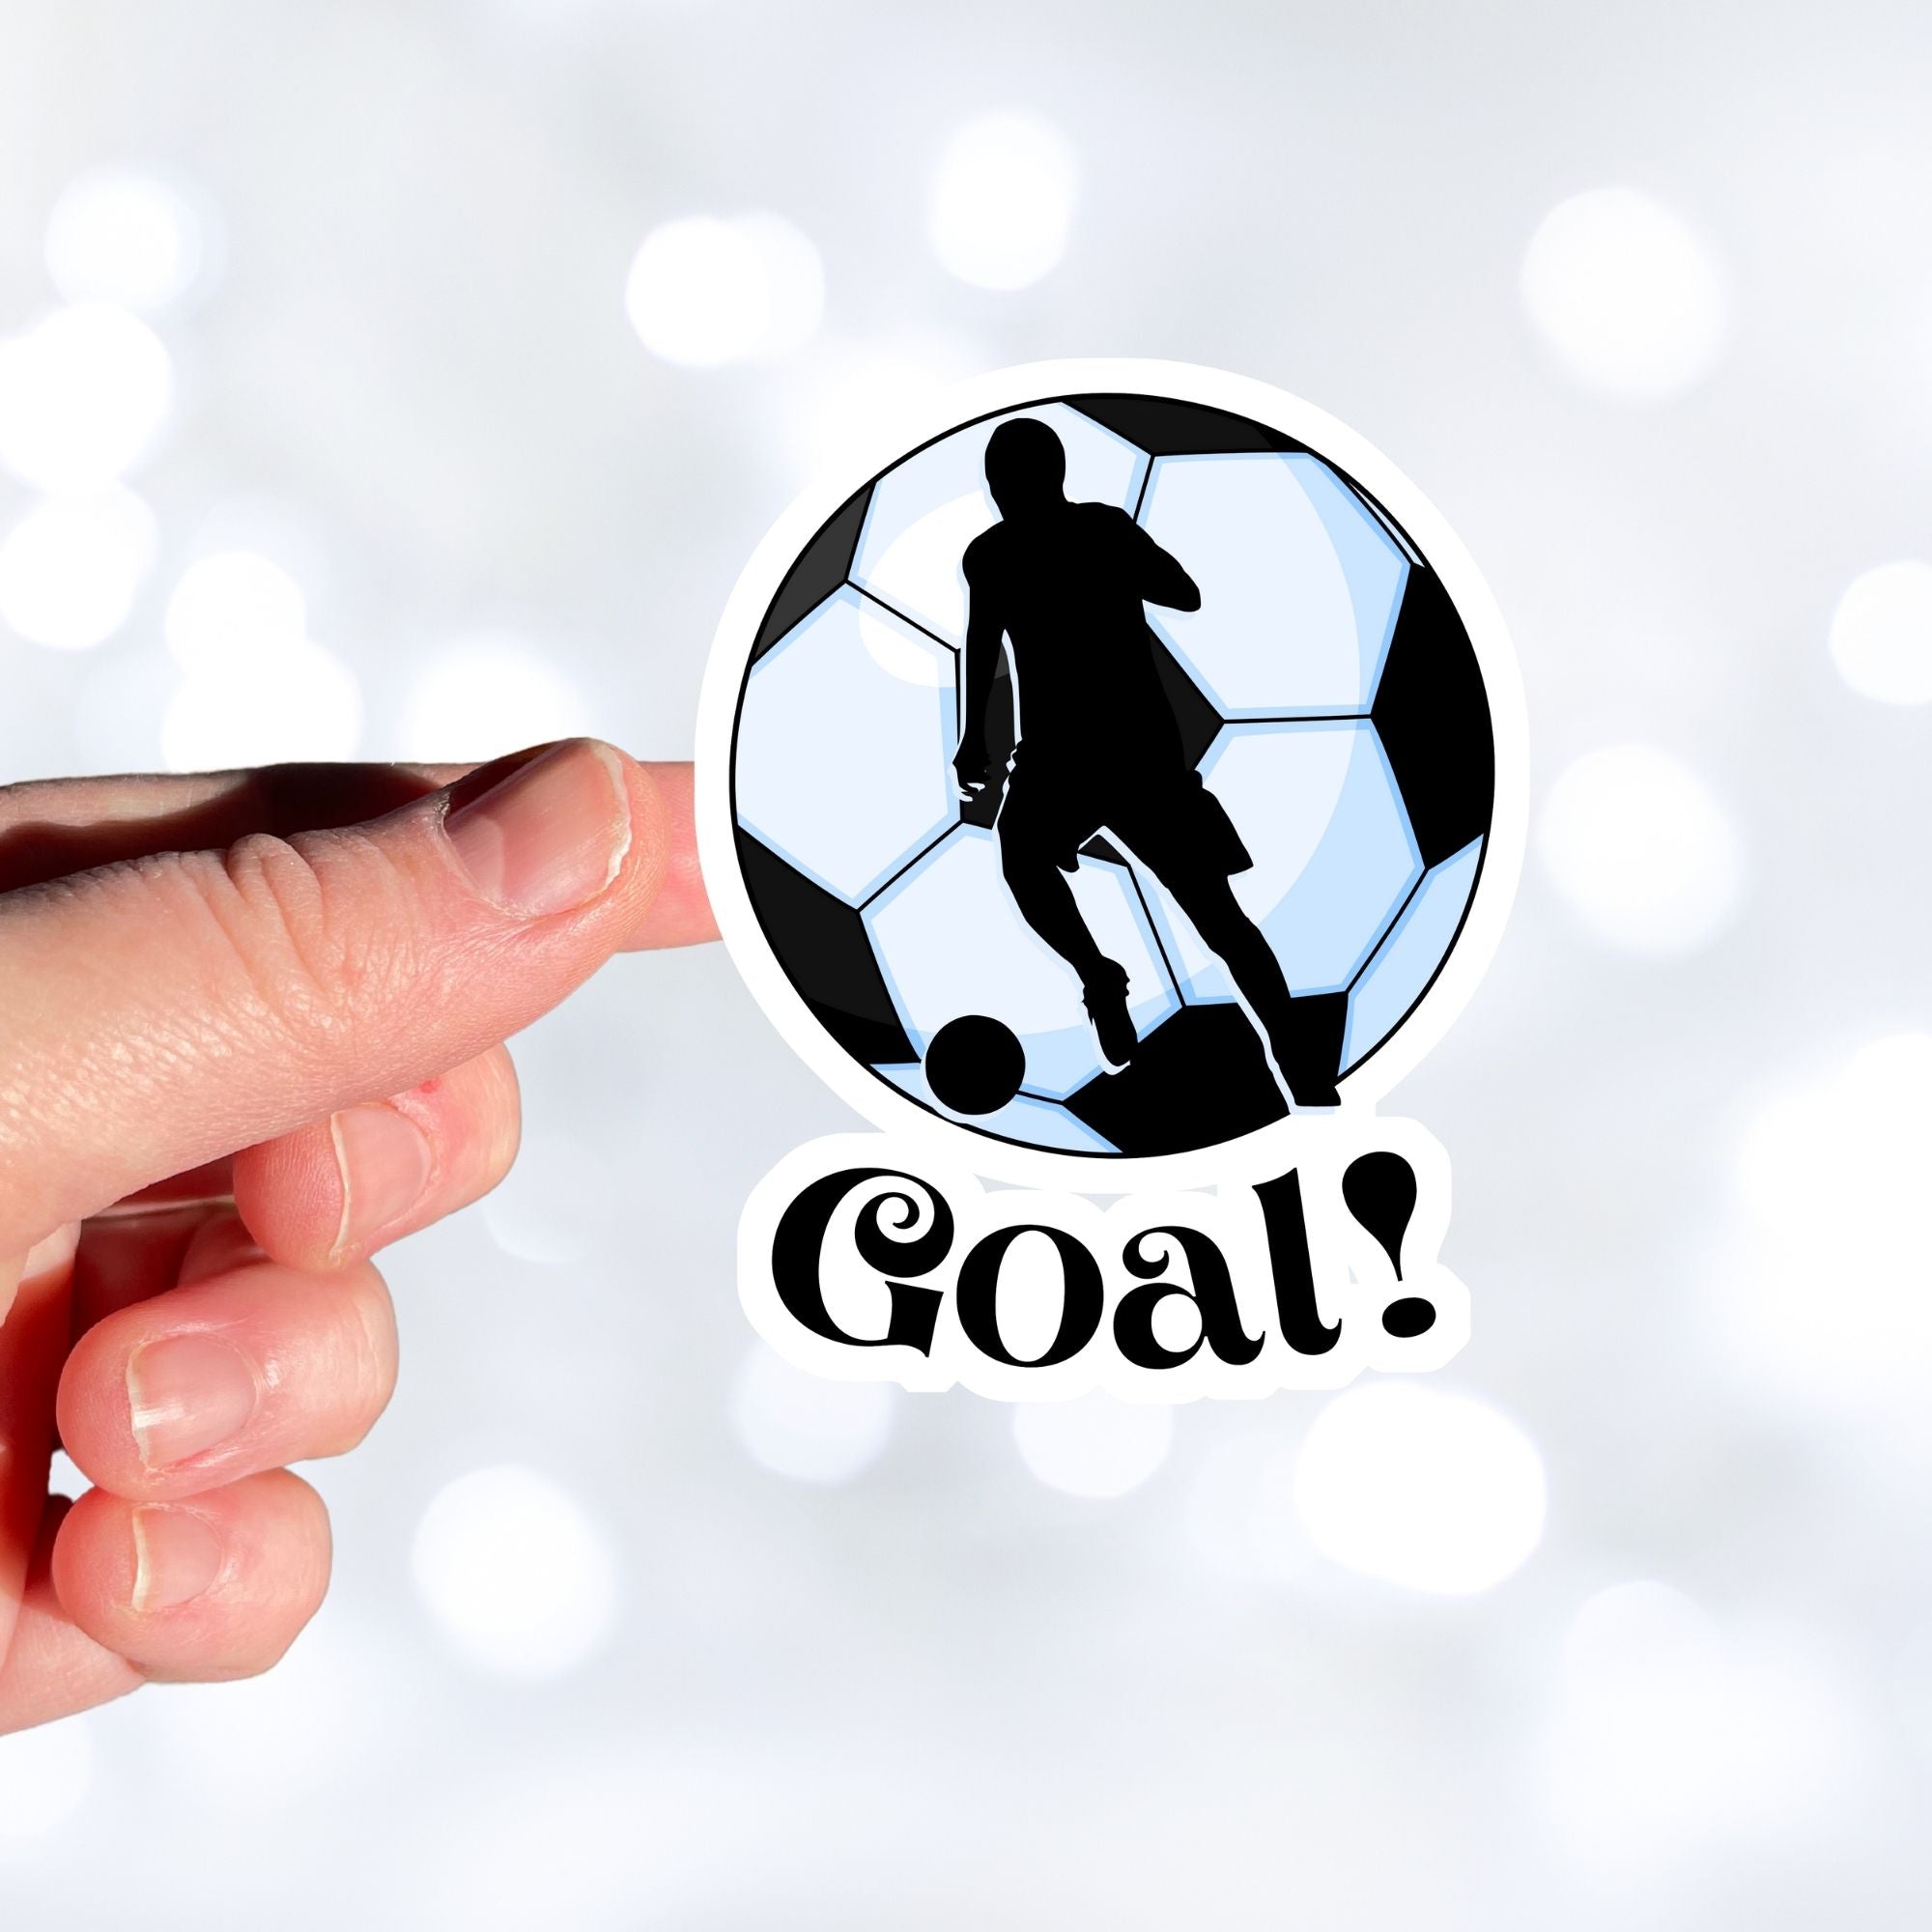 Show your love of soccer, or football, with this individual die-cut sticker! This sticker shows the silhouette of a player about to kick, on a black and white/blue soccer ball background, with the word "Goal!" below. This image shows a hand holding the soccer sticker.